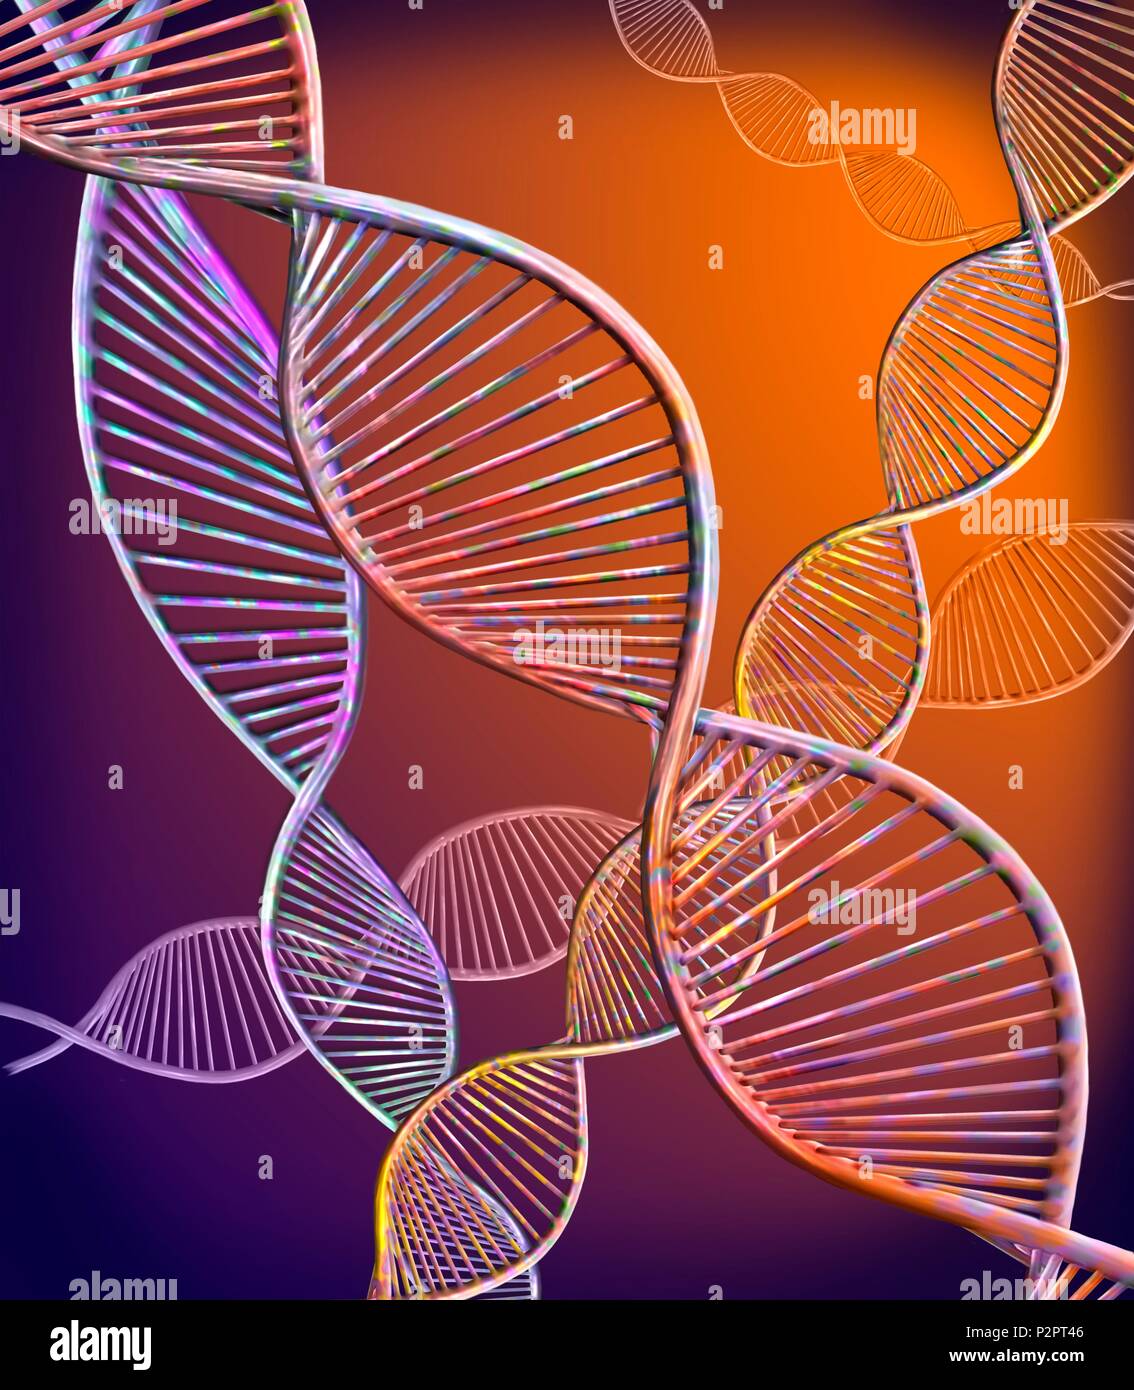 DNA strands. Computer illustration showing the structure of double stranded DNA (deoxyribonucleic acid) molecules. DNA is composed of two strands twisted into a double helix. Each strand consists of a sugar-phosphate backbone (curved) attached to nucleotide bases. There are four bases: adenine, cytosine, guanine and thymine. DNA contains sections called genes that encode the body's genetic information. Stock Photo